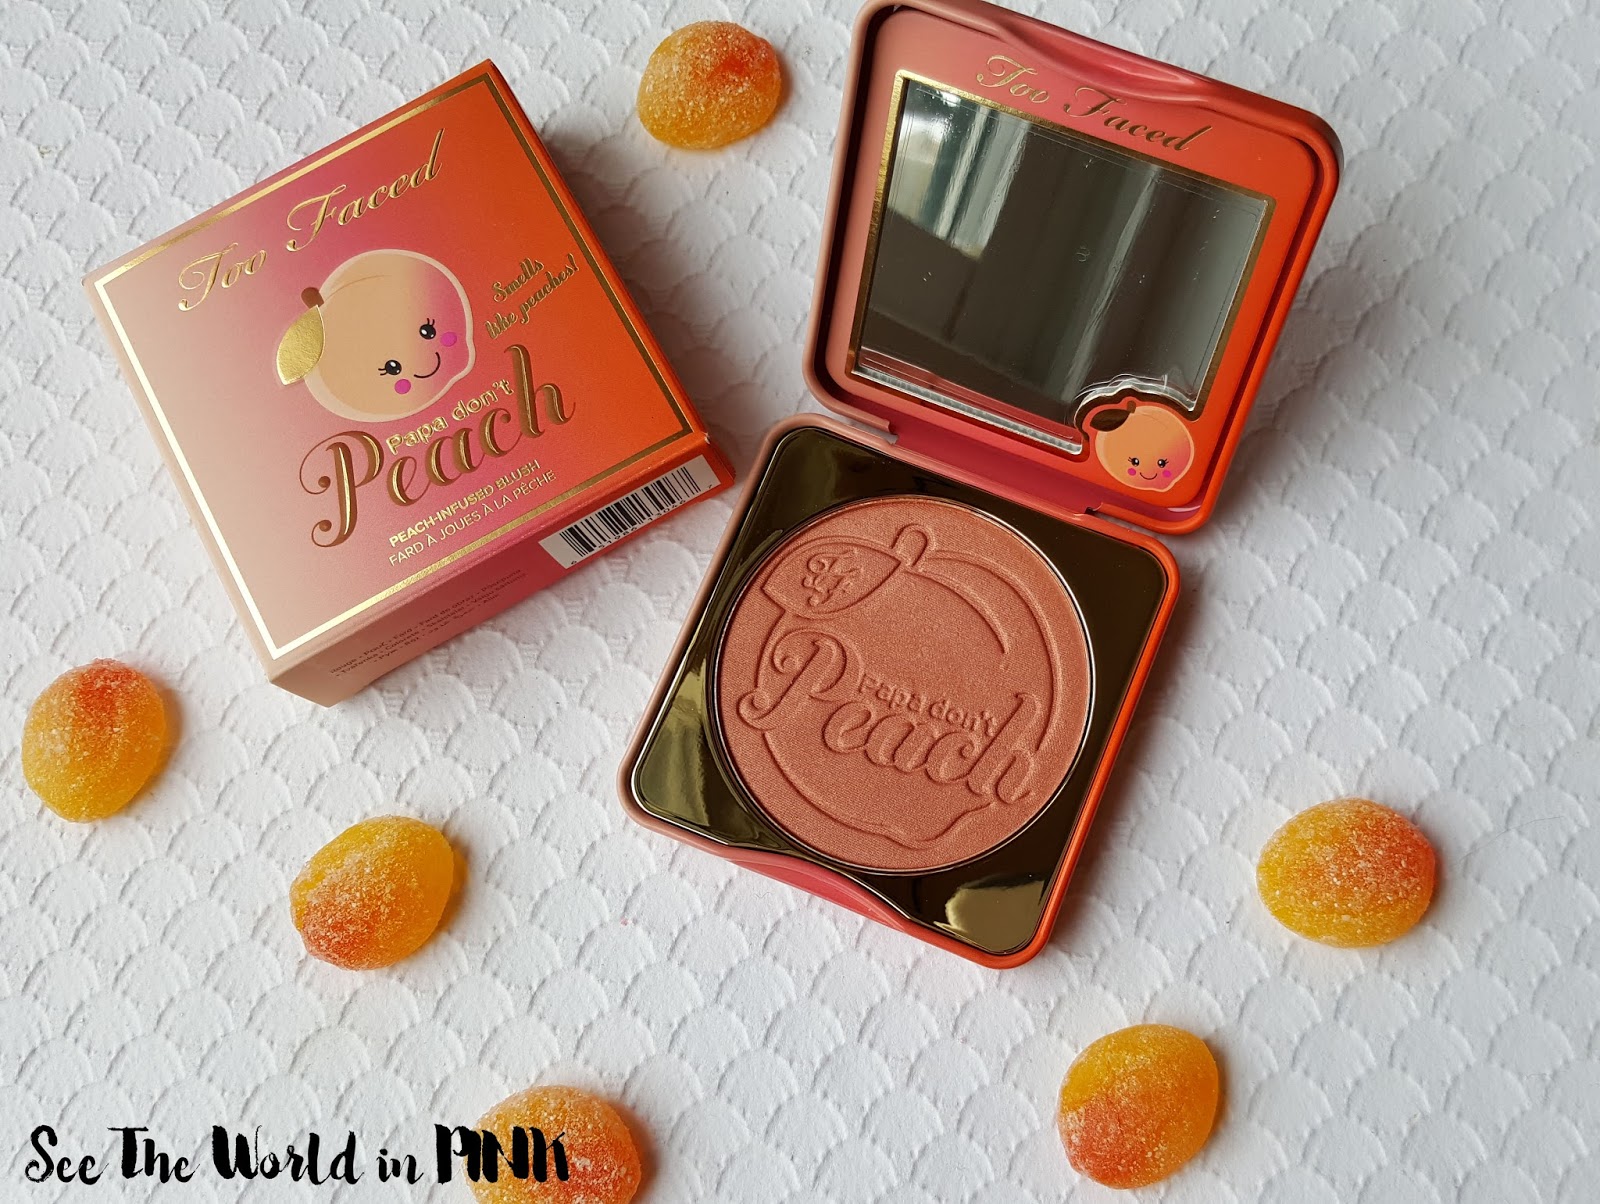 Too Faced Sweet Peach "Papa Don't Peach Blush" - Swatches and Review! 